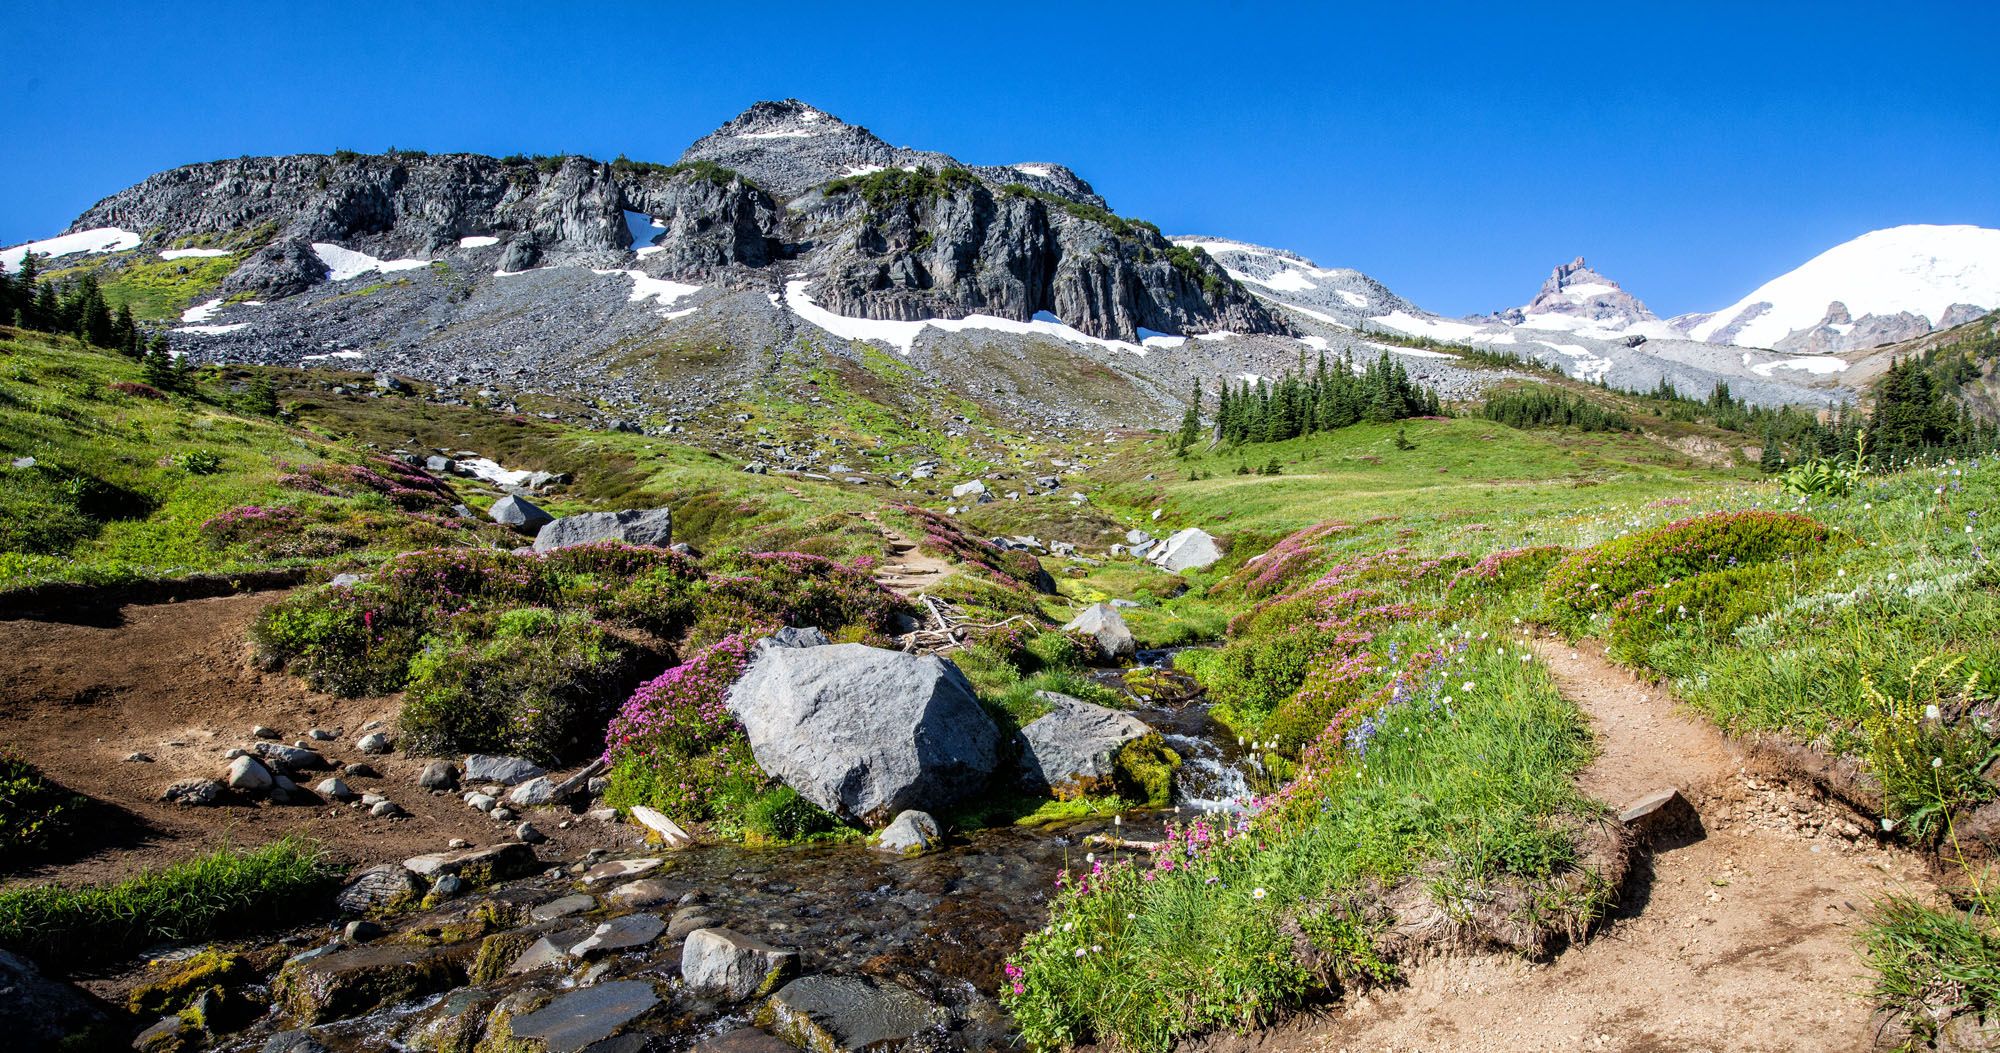 Featured image for “Summerland Trail to Panhandle Gap Hike | Mount Rainier National Park”